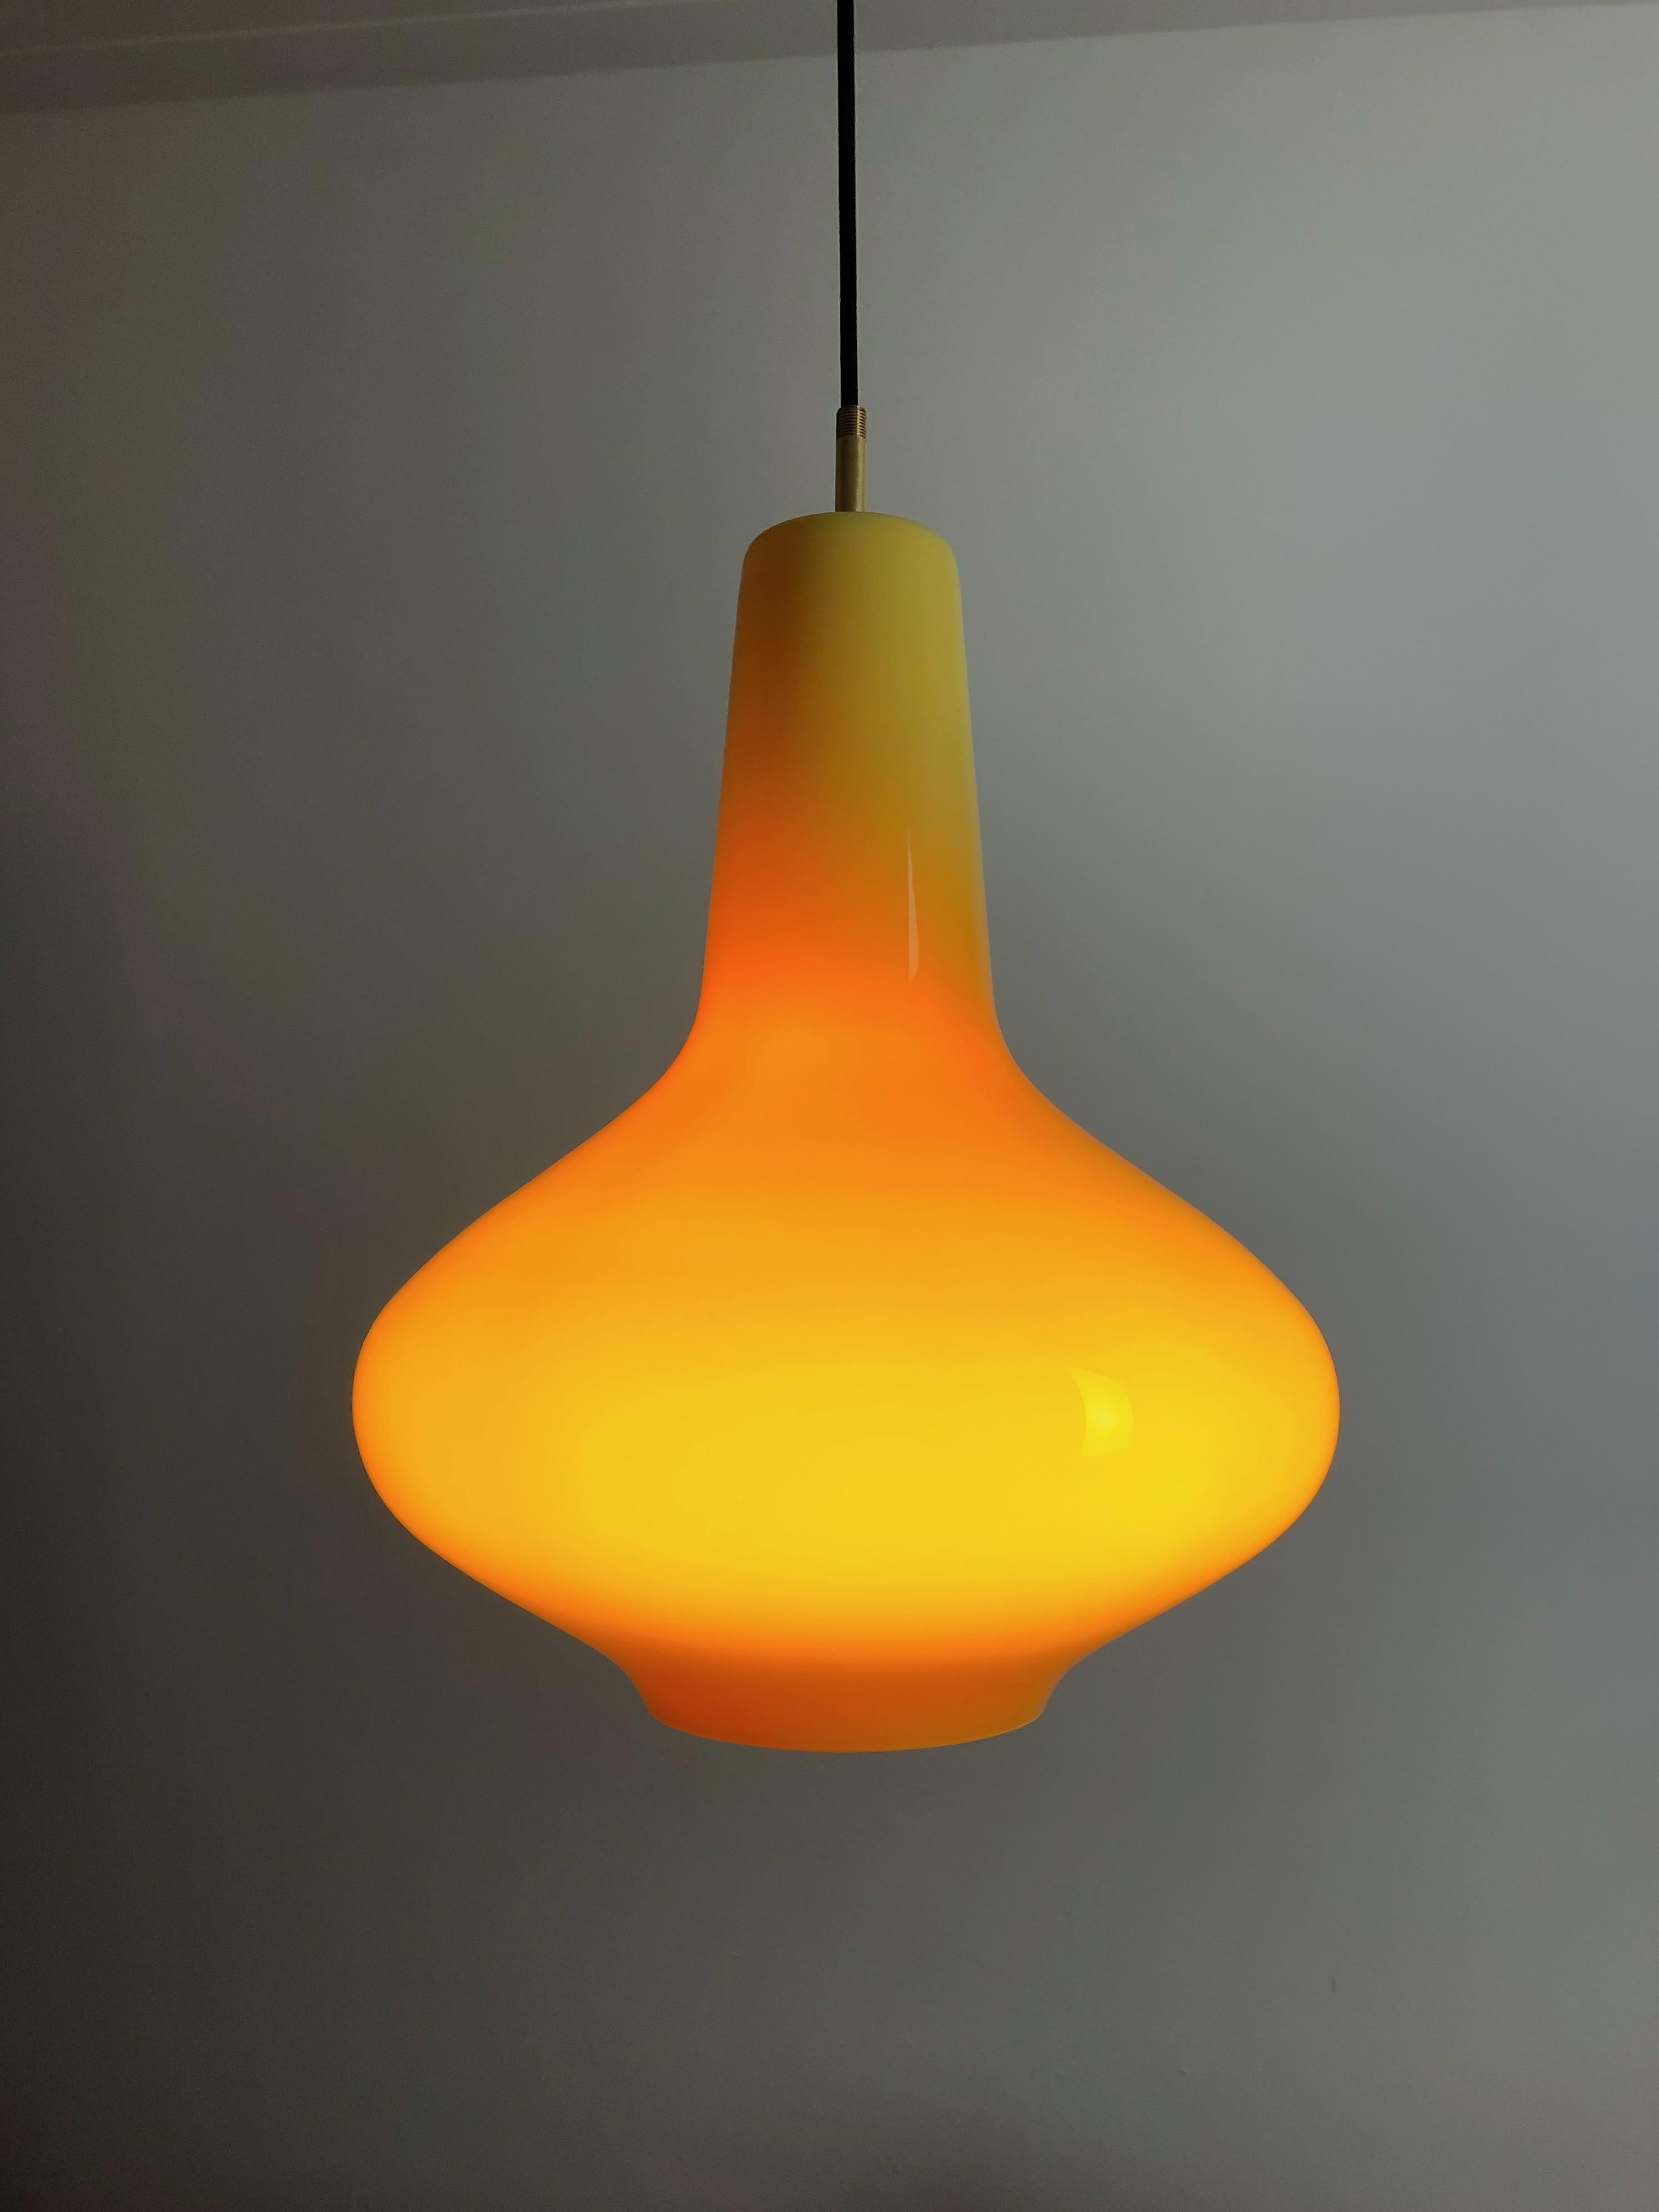 Stunning hand-blown glass pendant lamp model No. 011.13. This lamp is designed by Massimo Vignelli at the start of his career in design.
The pendant lamp is made by Murano glass specialist Venini in the 1950’s. One of the most special lamps that